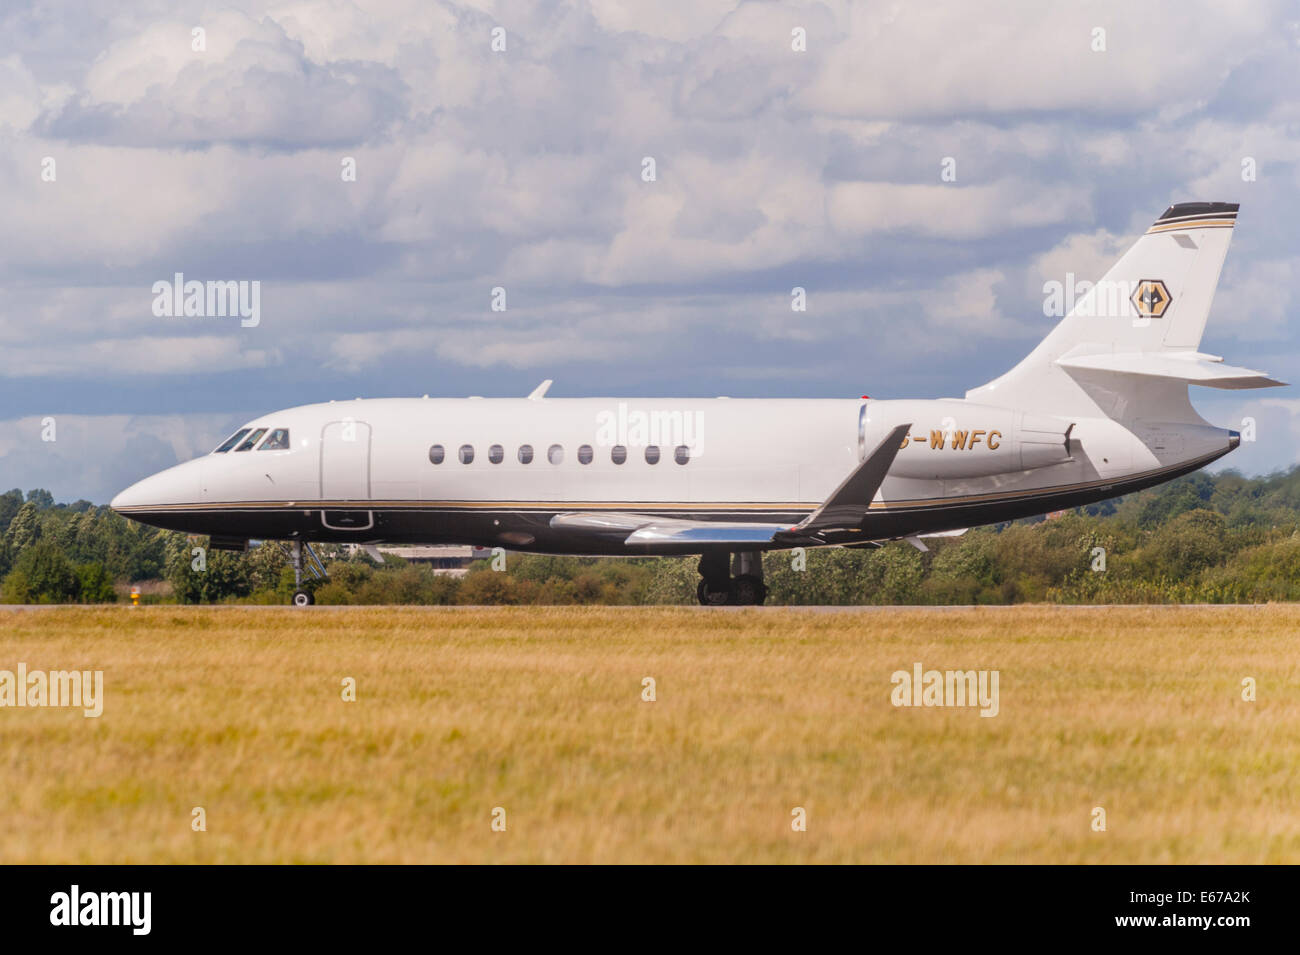 A plane Dassault Falcon 2000EX (G-WWFC) taking off from Luton Airport in England , Britain , Uk Stock Photo